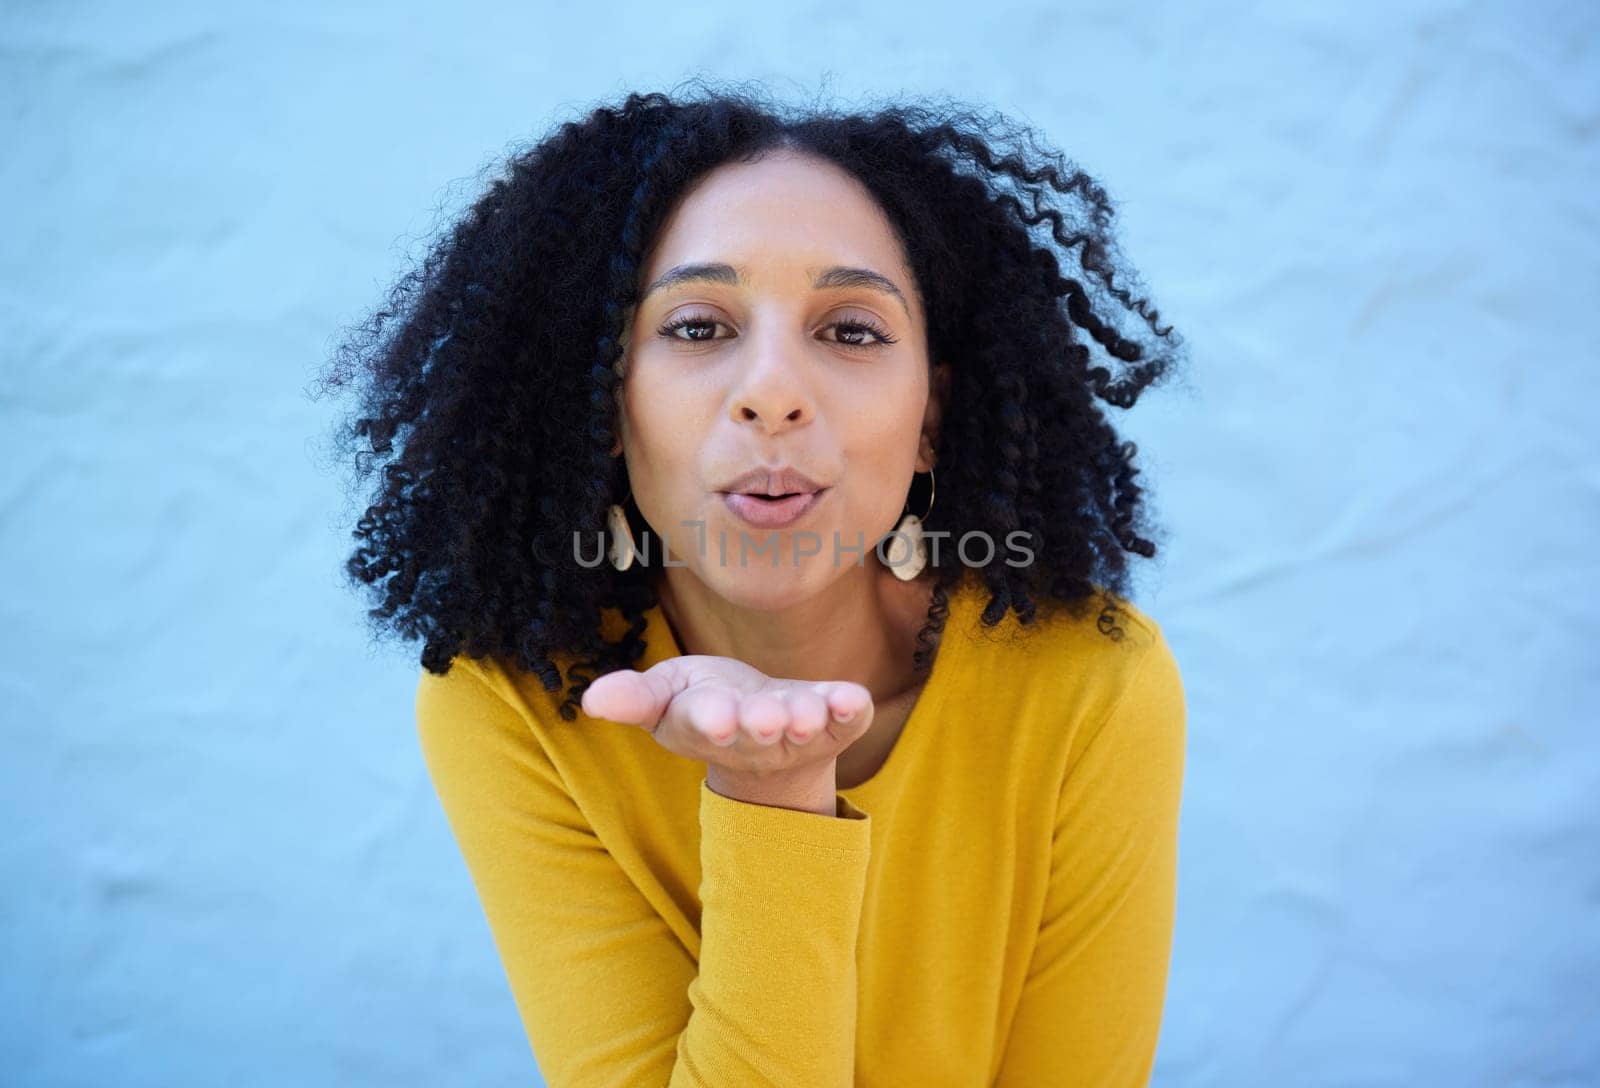 Black woman, portrait and blowing kiss for love, care and flirting on blue background, wall backdrop or outdoor. Young girl, hand kisses and expression of happiness, romance and kissing face emoji.